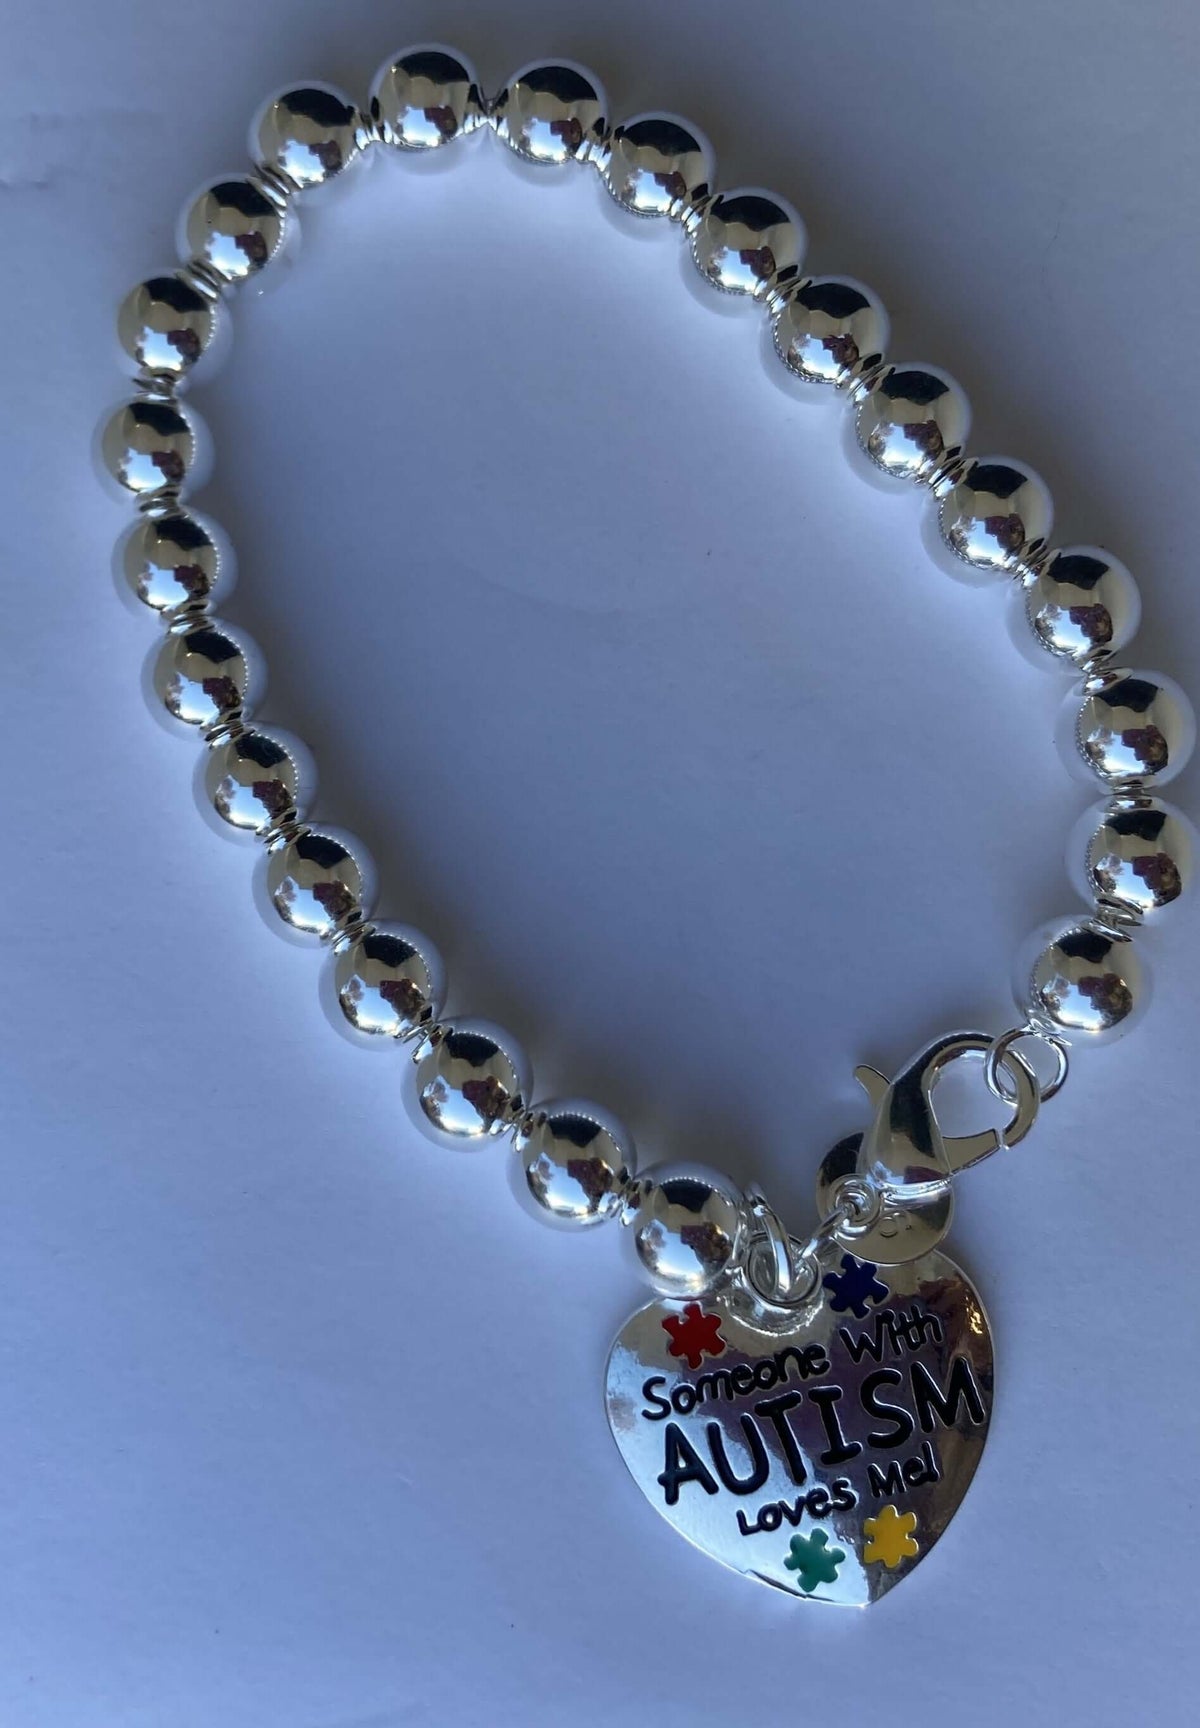 Someone with Autism Loves Me Beaded Charm Bracelet - The House of Awareness